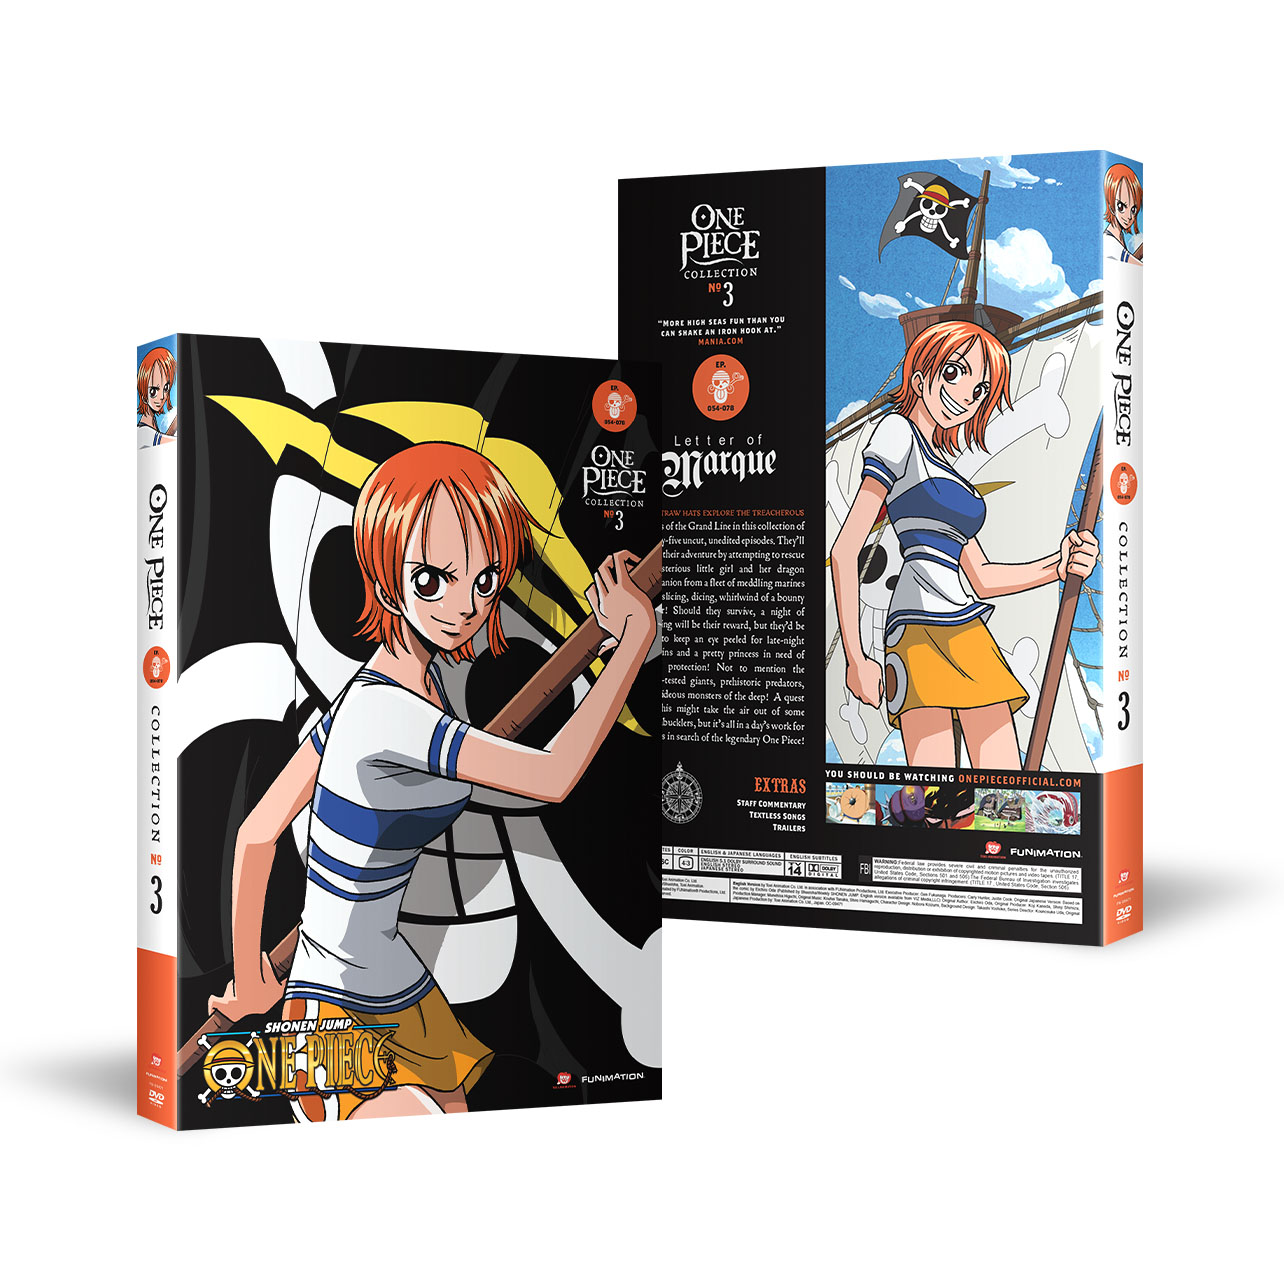 One Piece - Collection 3 - DVD image count 0